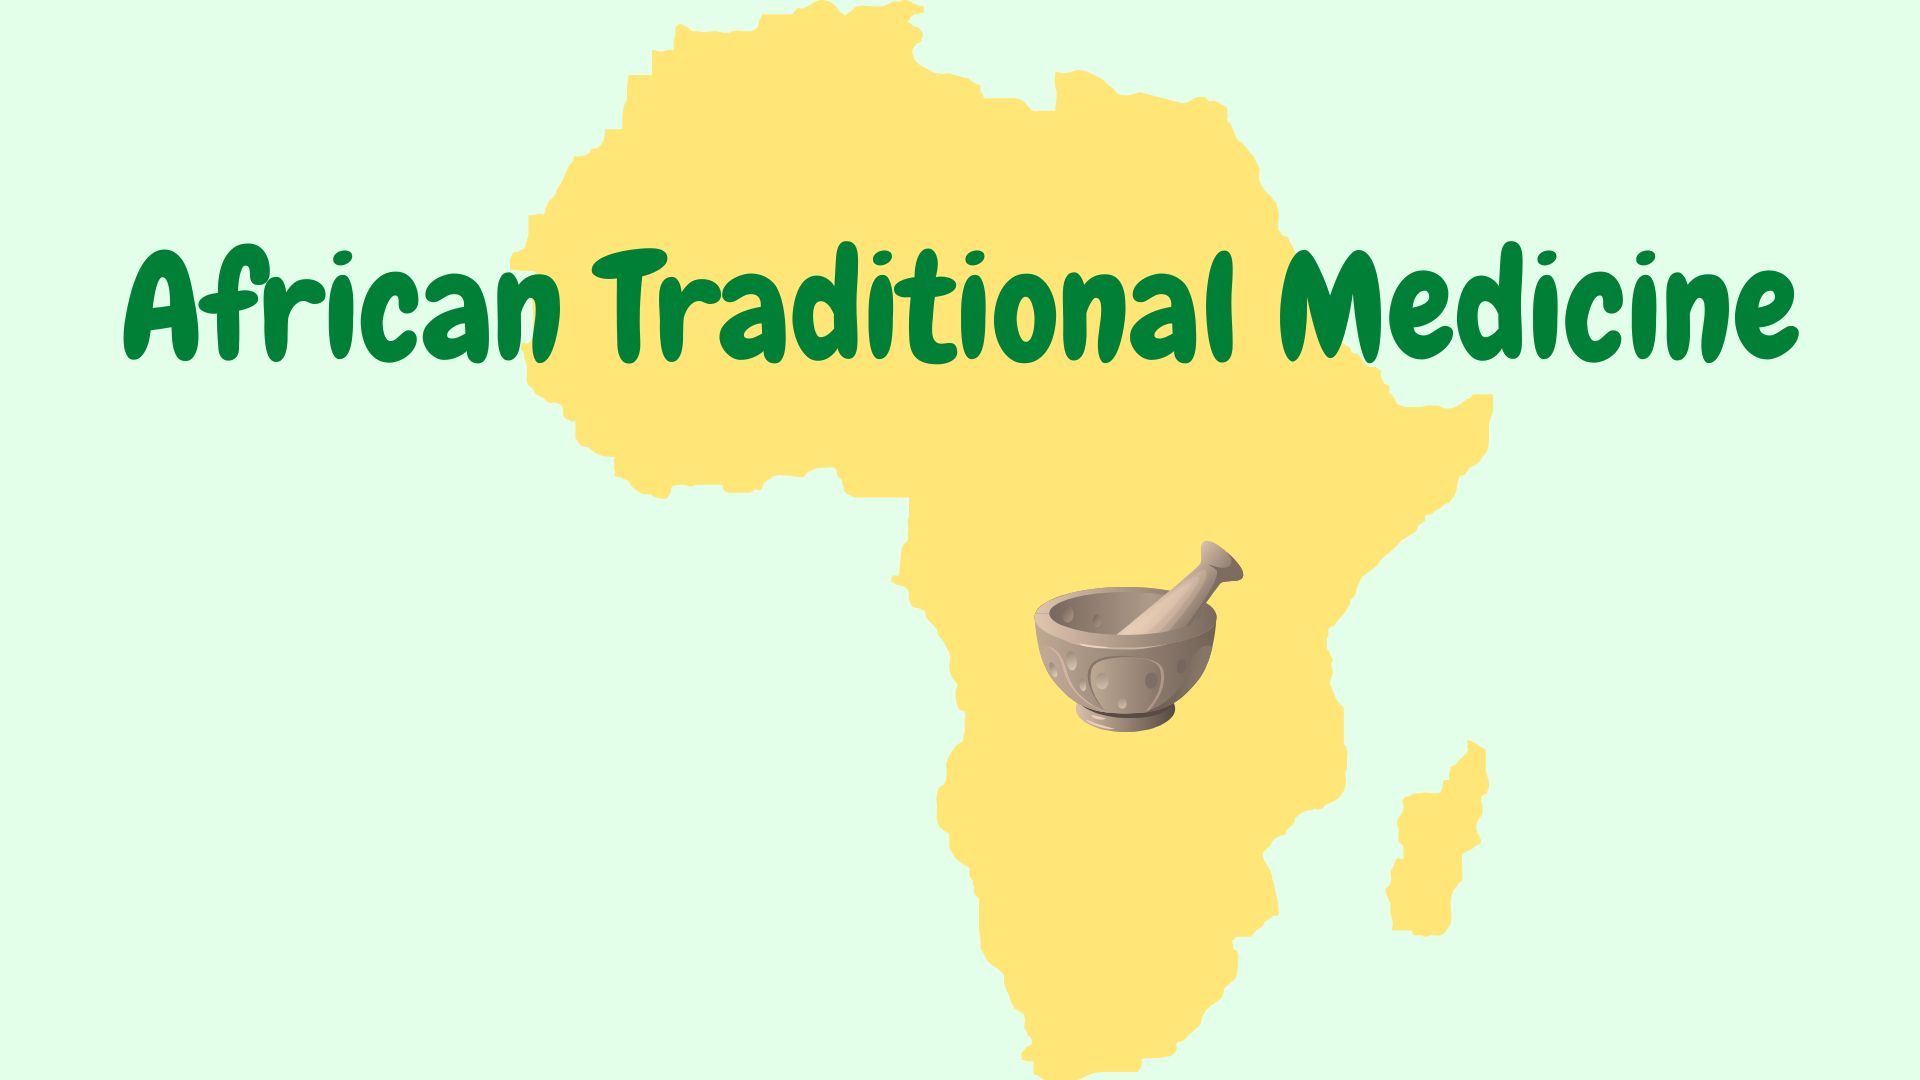 African traditional medicine